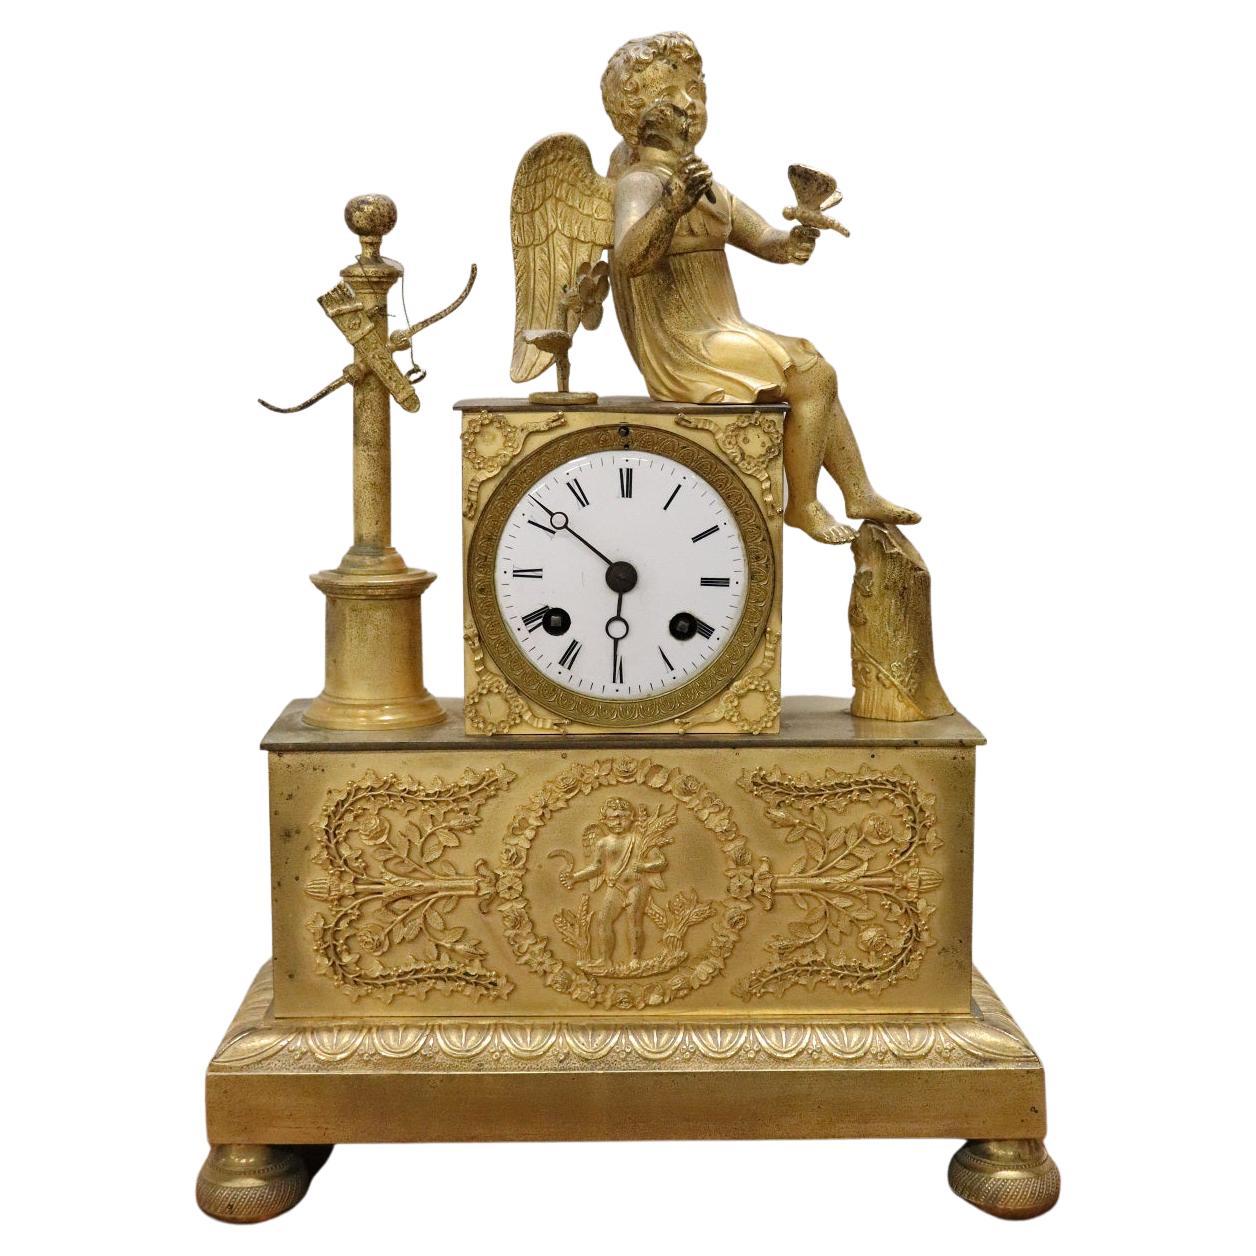 Early 19th Century French Empire Fine Gilt Bronze Mantle Clock with Cupid